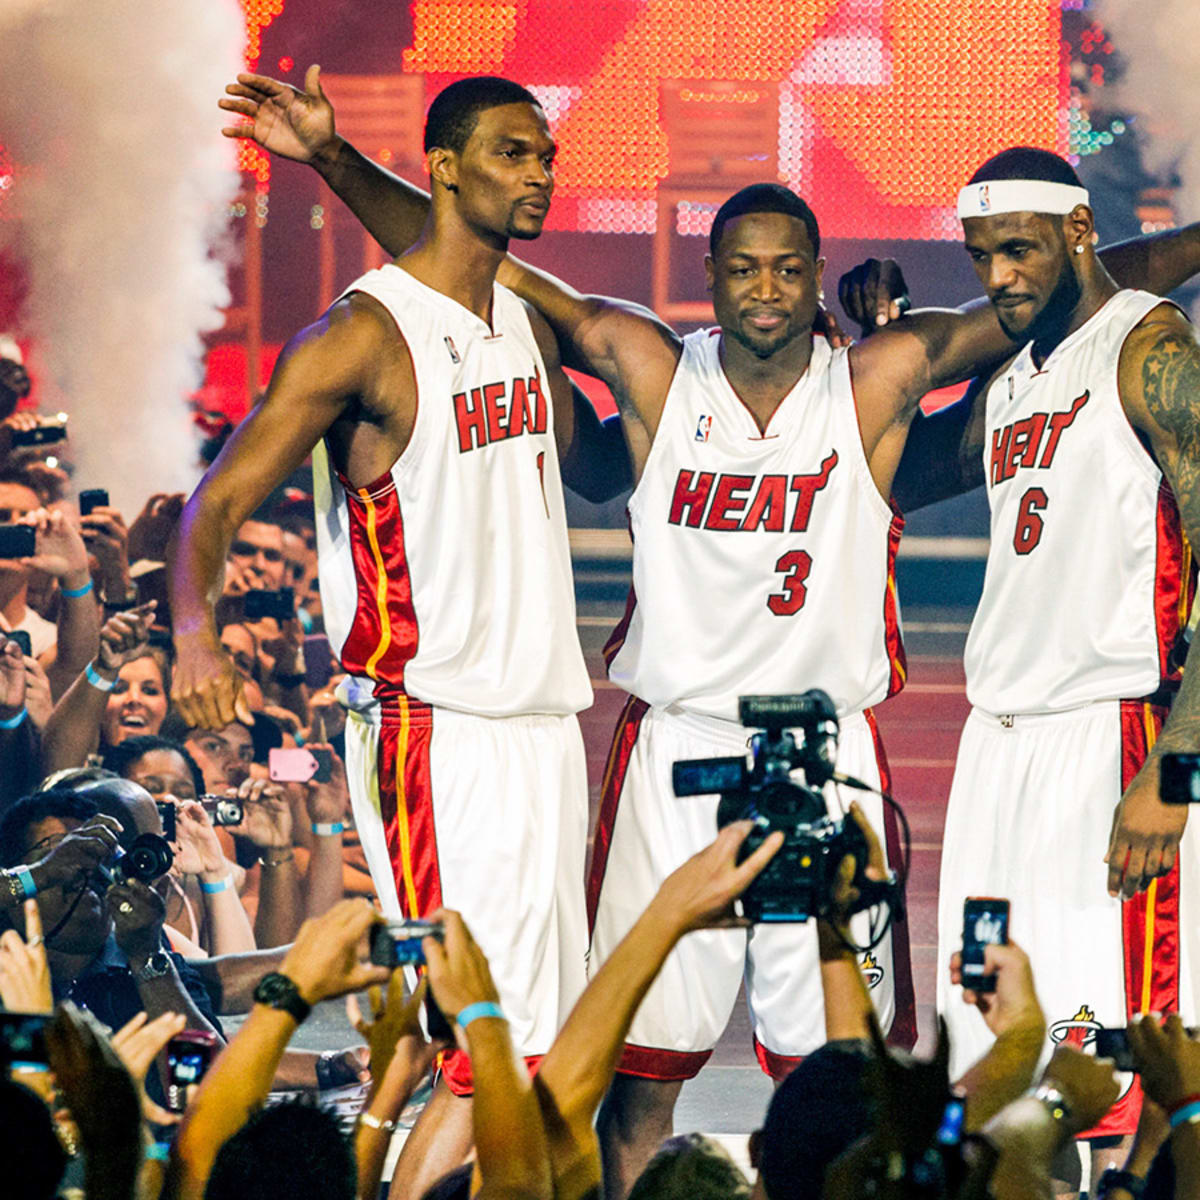 With NBA championship in sight, Miami Heat's LeBron James wants to